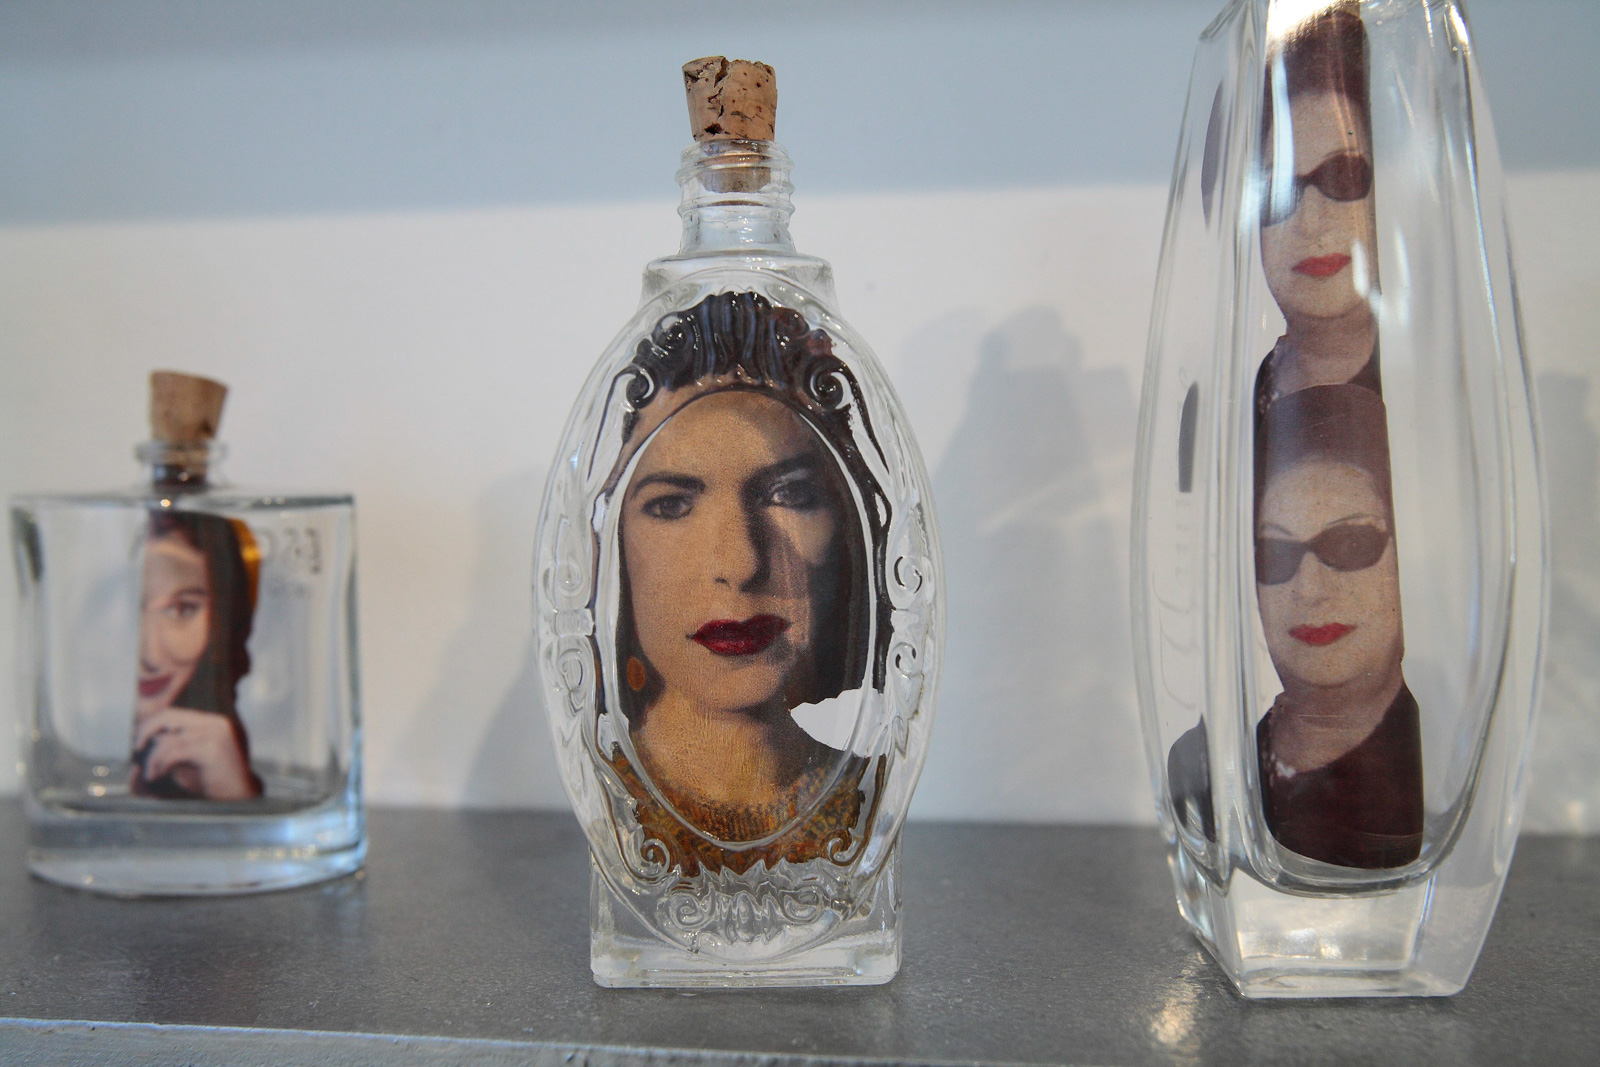 A perfume bottle with a label depicting a woman's face.